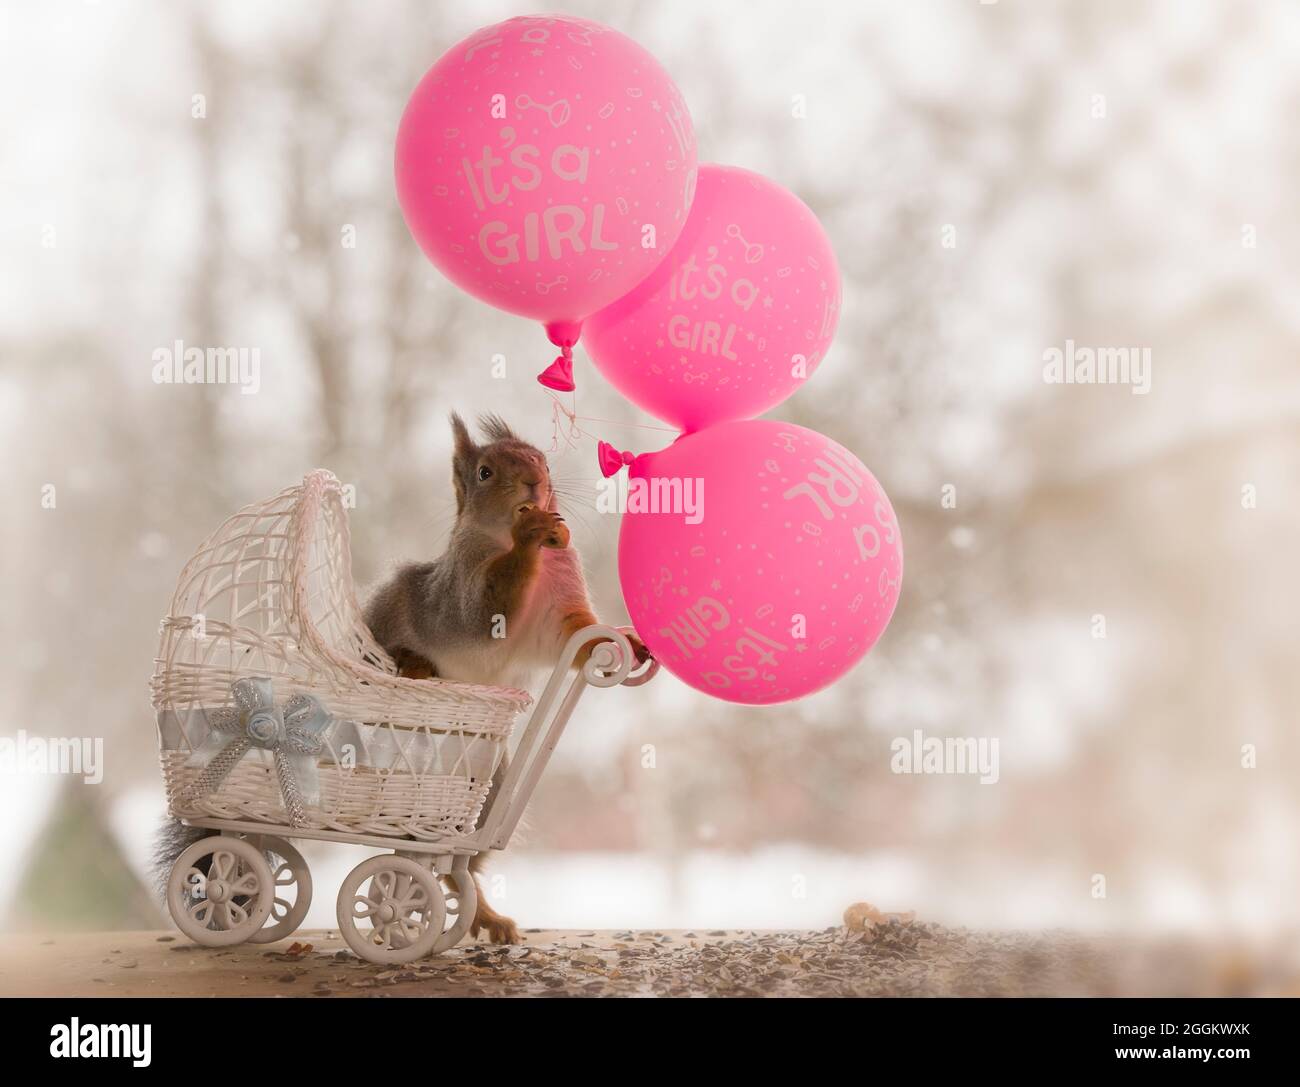 red squirrel in an stroller holding balloons Stock Photo